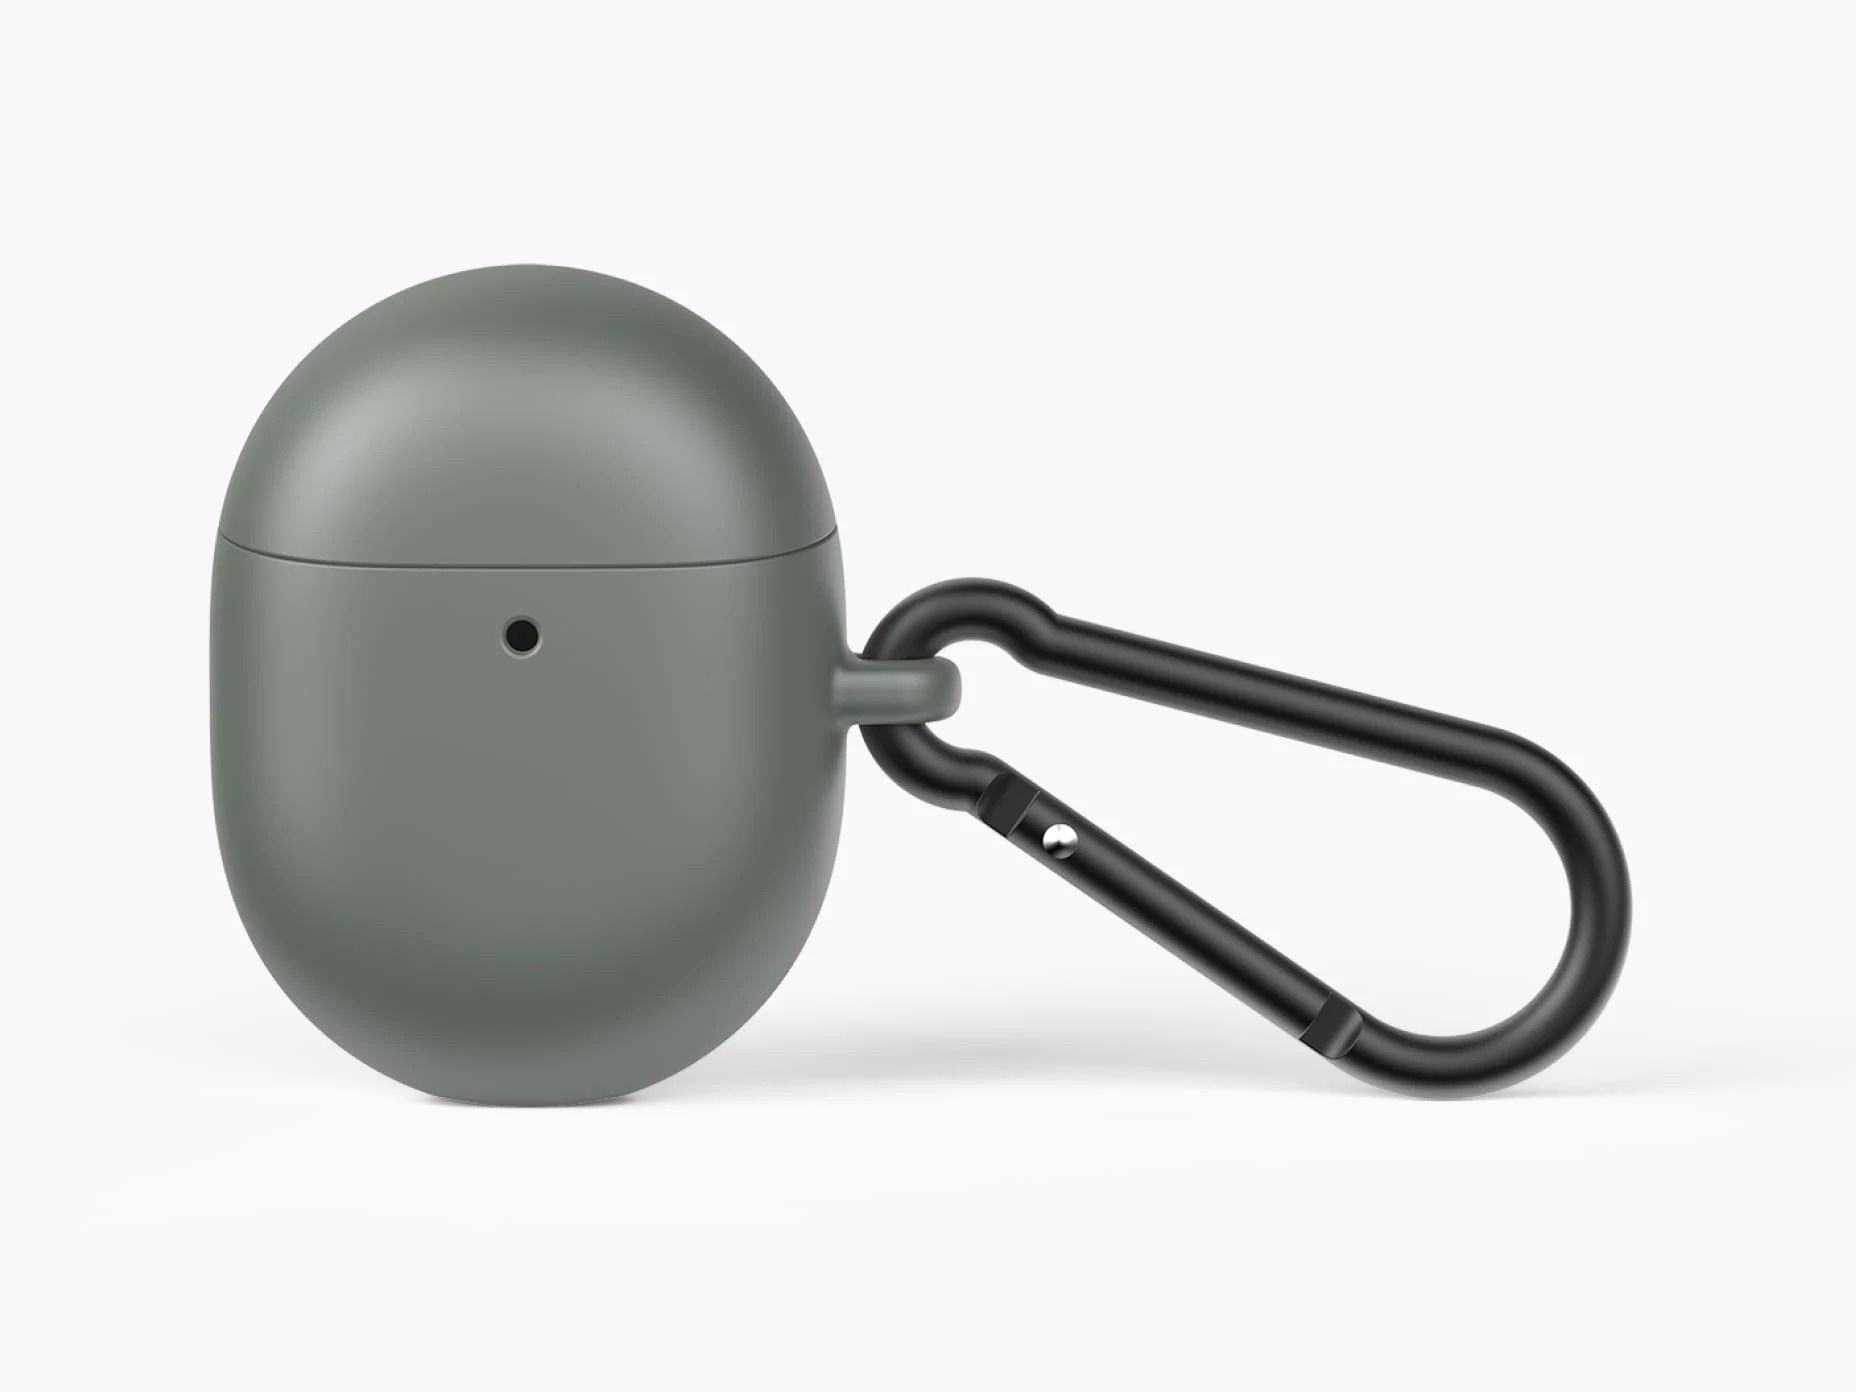 Pixel Buds A-Series cases come from Tech21, Nomad - 9to5Google